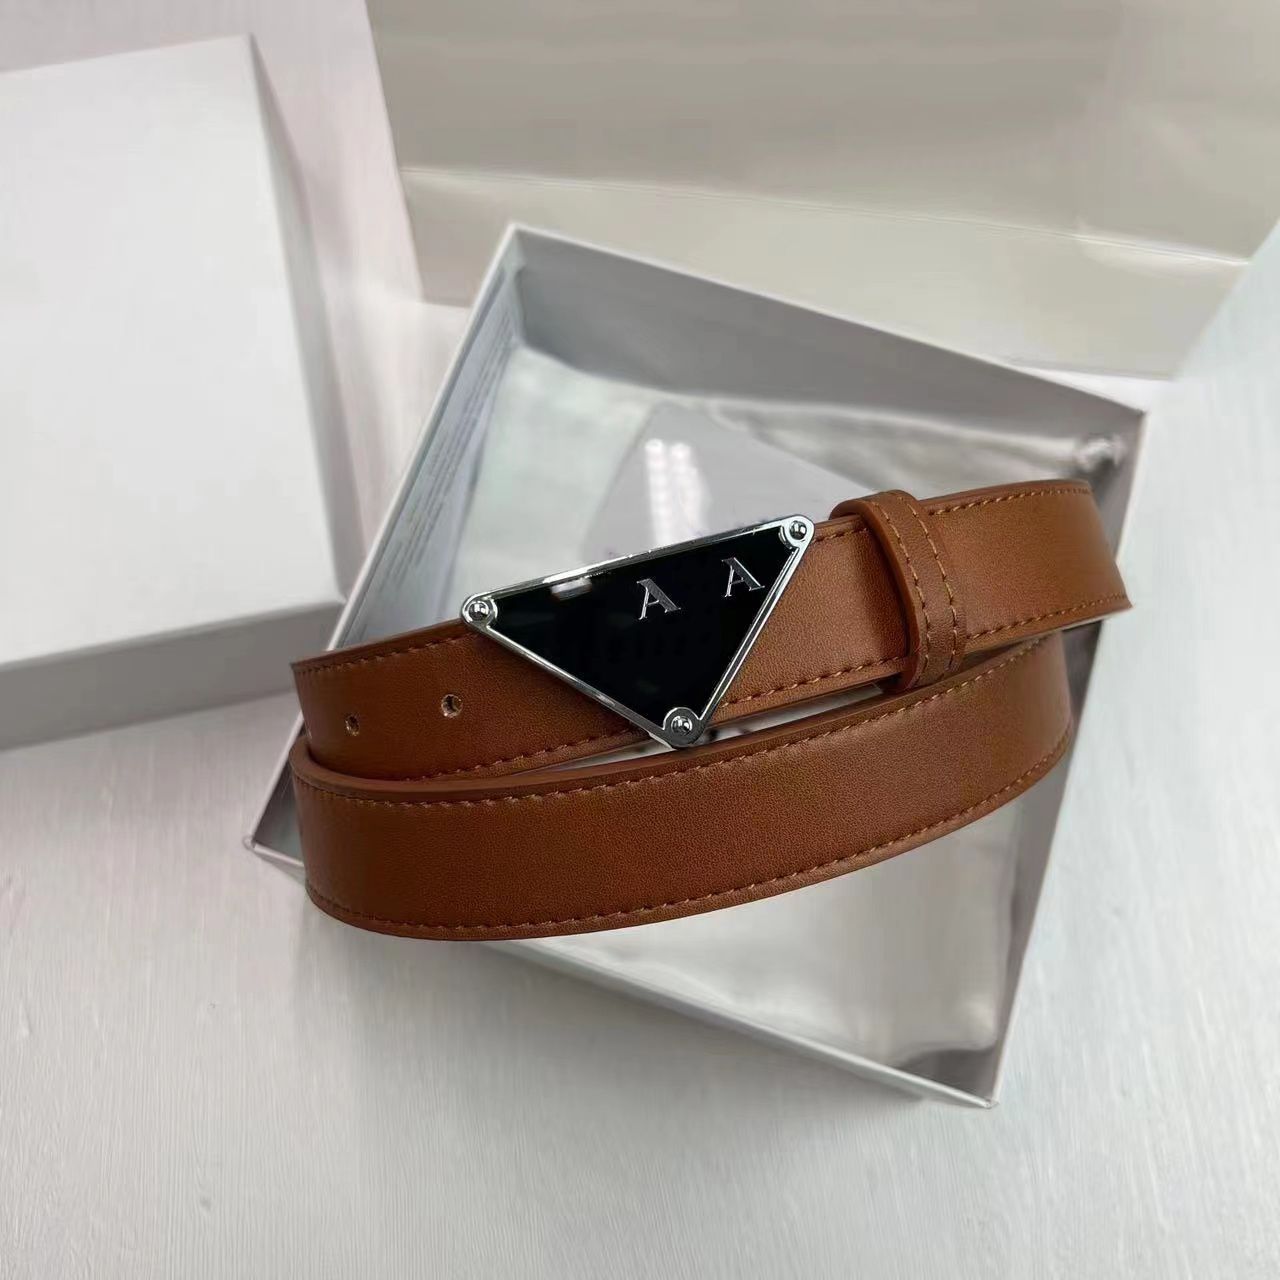 3.0Brown + Silver Buckle